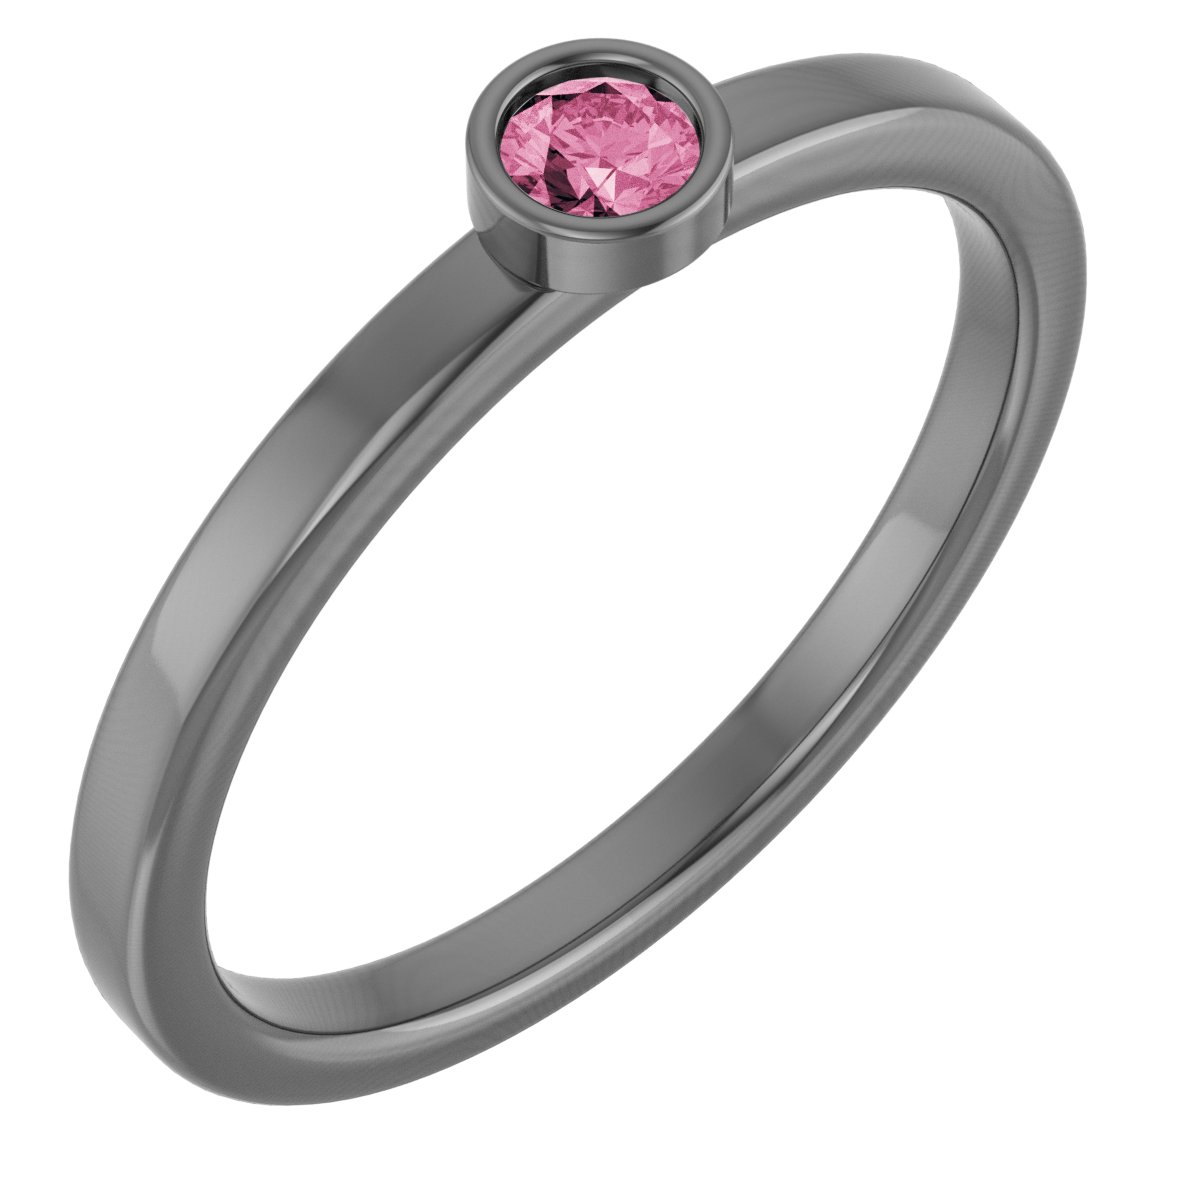 Rhodium-Plated Sterling Silver 3 mm Round Pink Tourmaline Ring